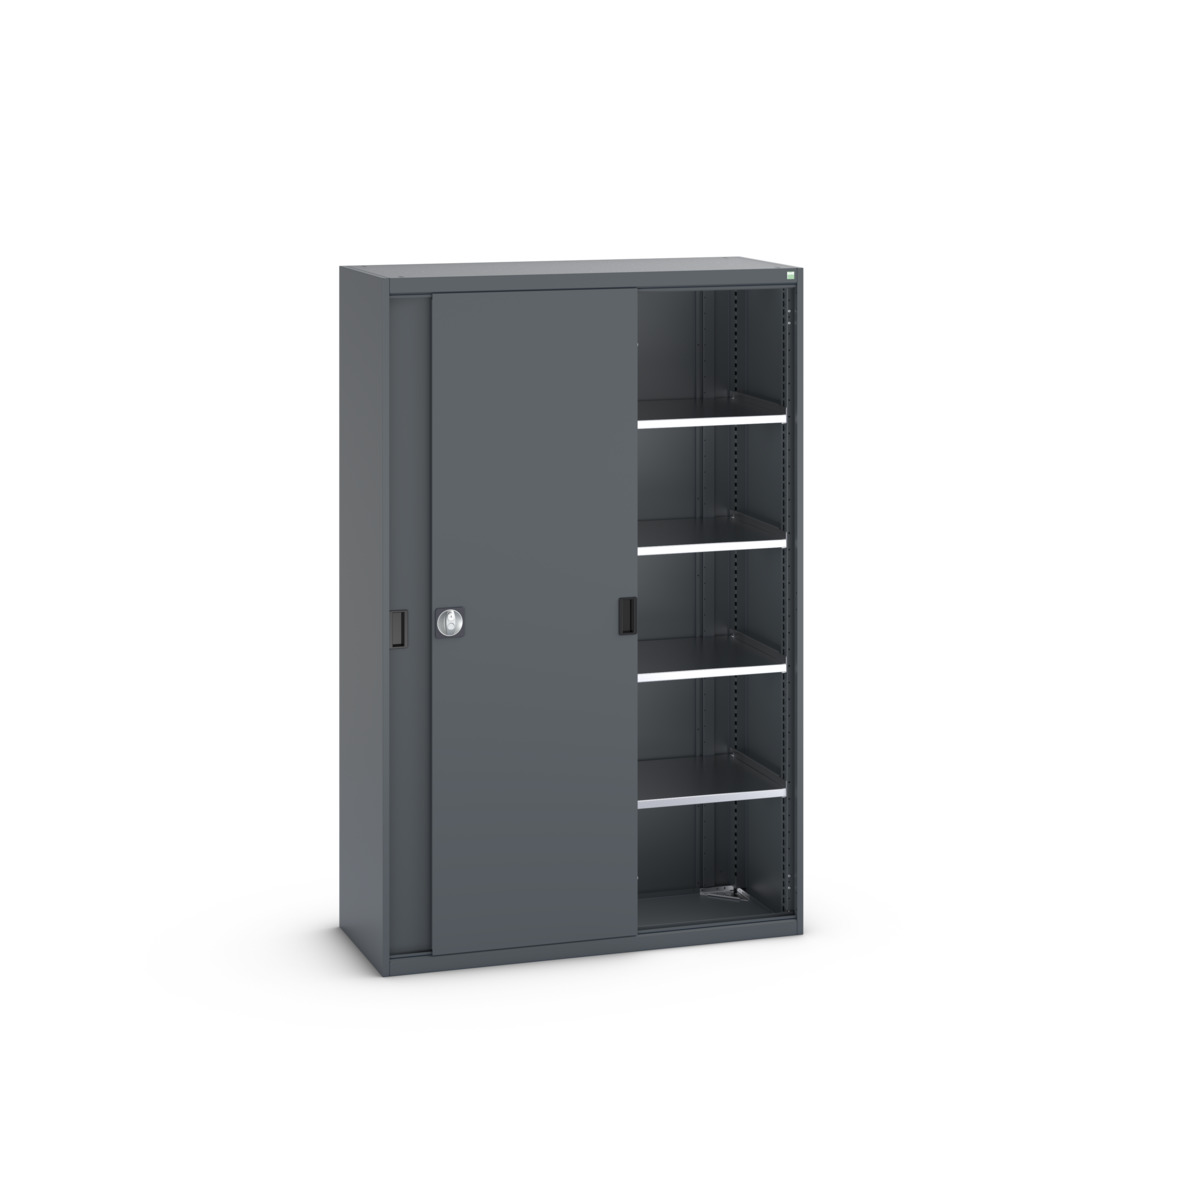 40014063.77V - Armoire Cubio SMS-13520-1.2